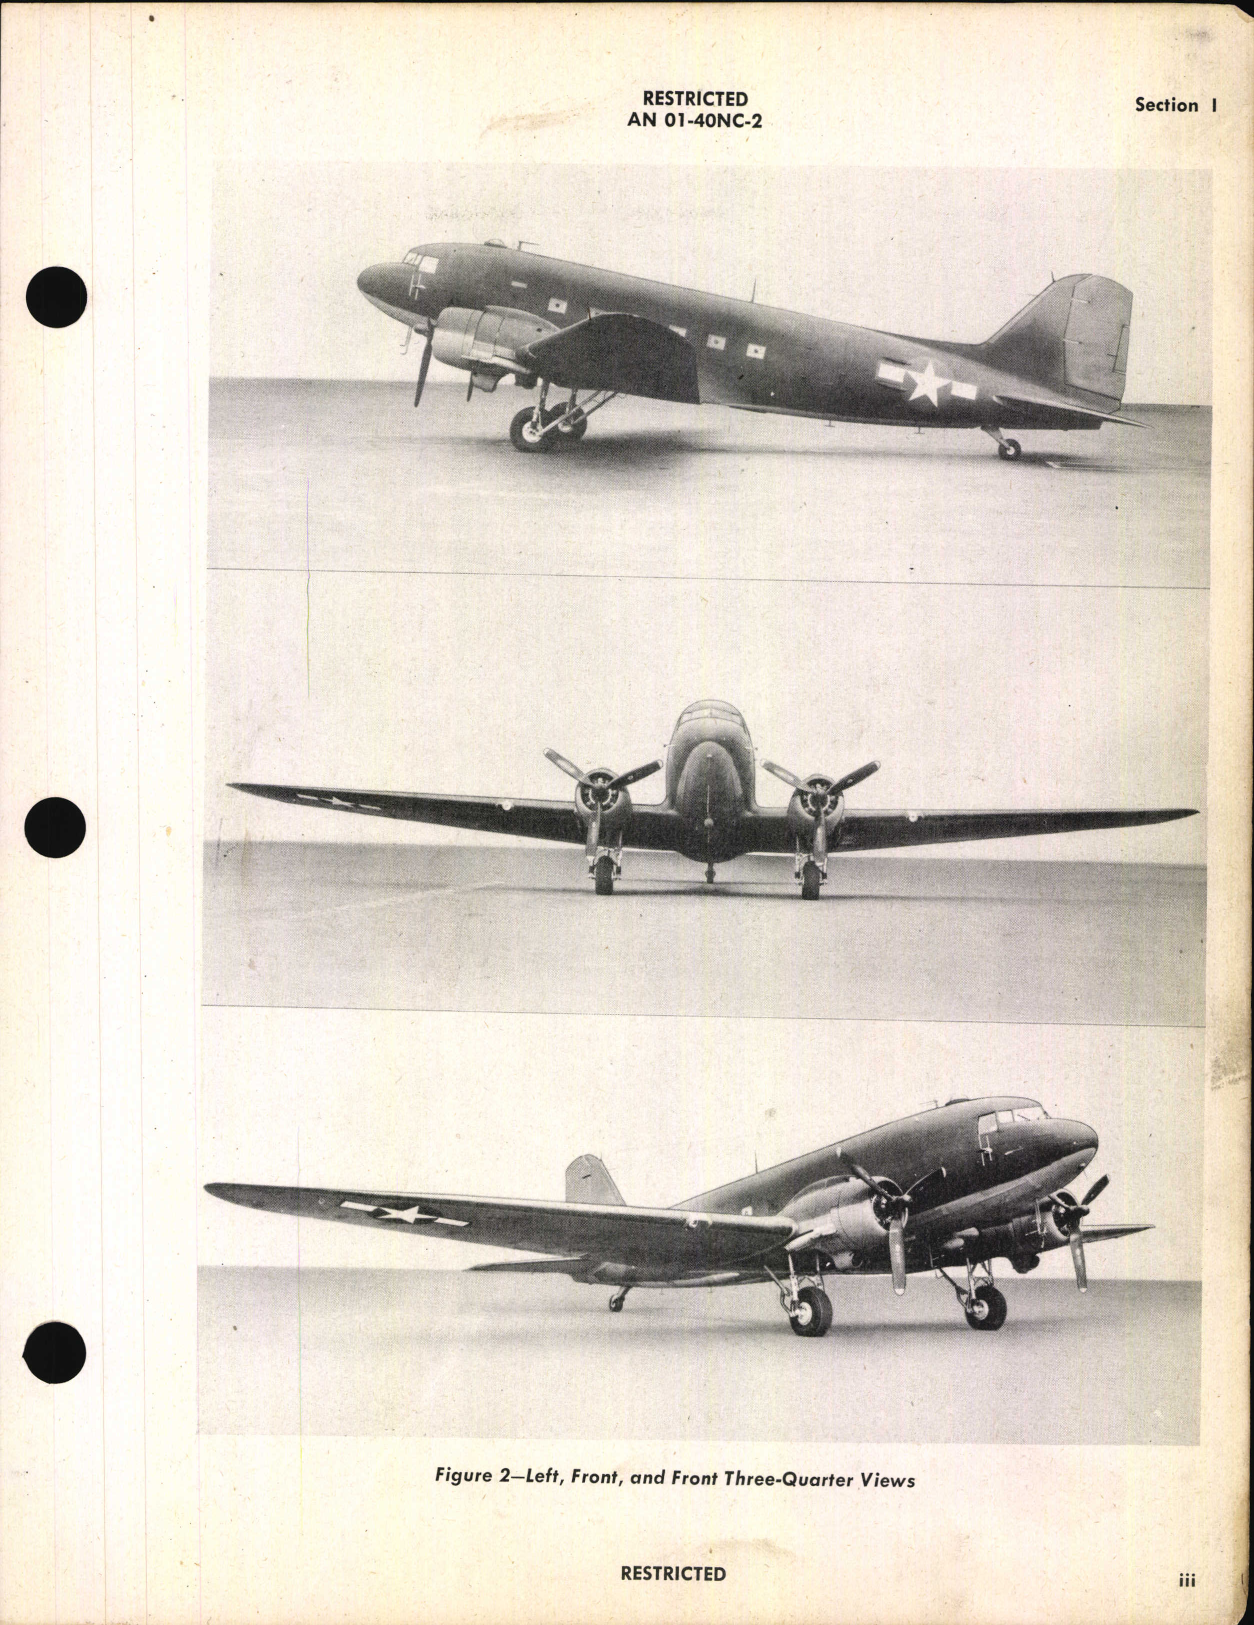 Sample page 5 from AirCorps Library document: Erection and Maintenance for C-47, C-47A, R4D-1, and R4D-5